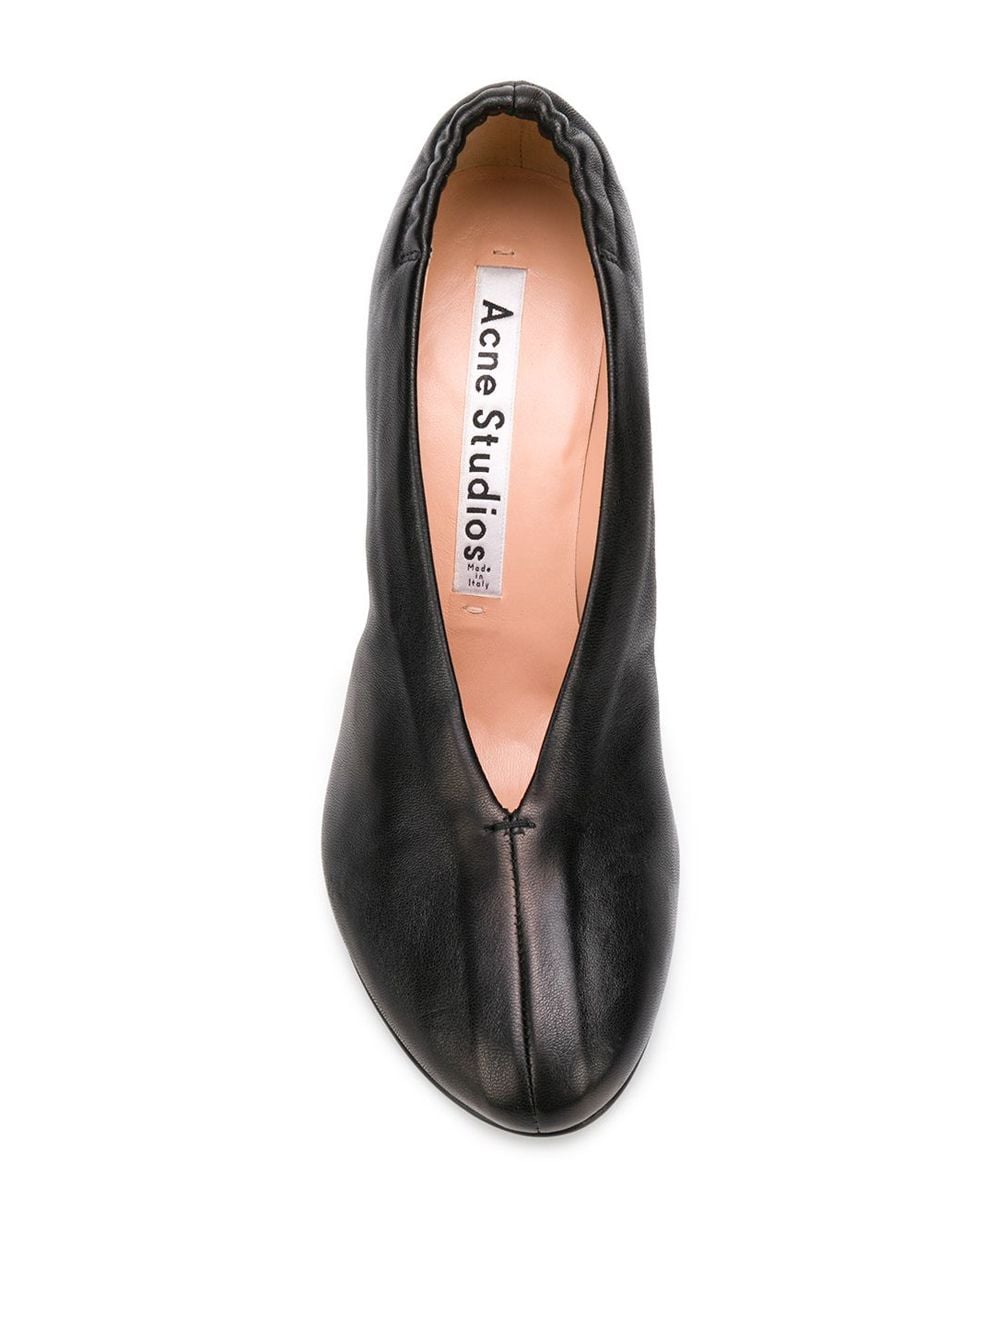 Acne Studios Sully Deconstructed Pumps 